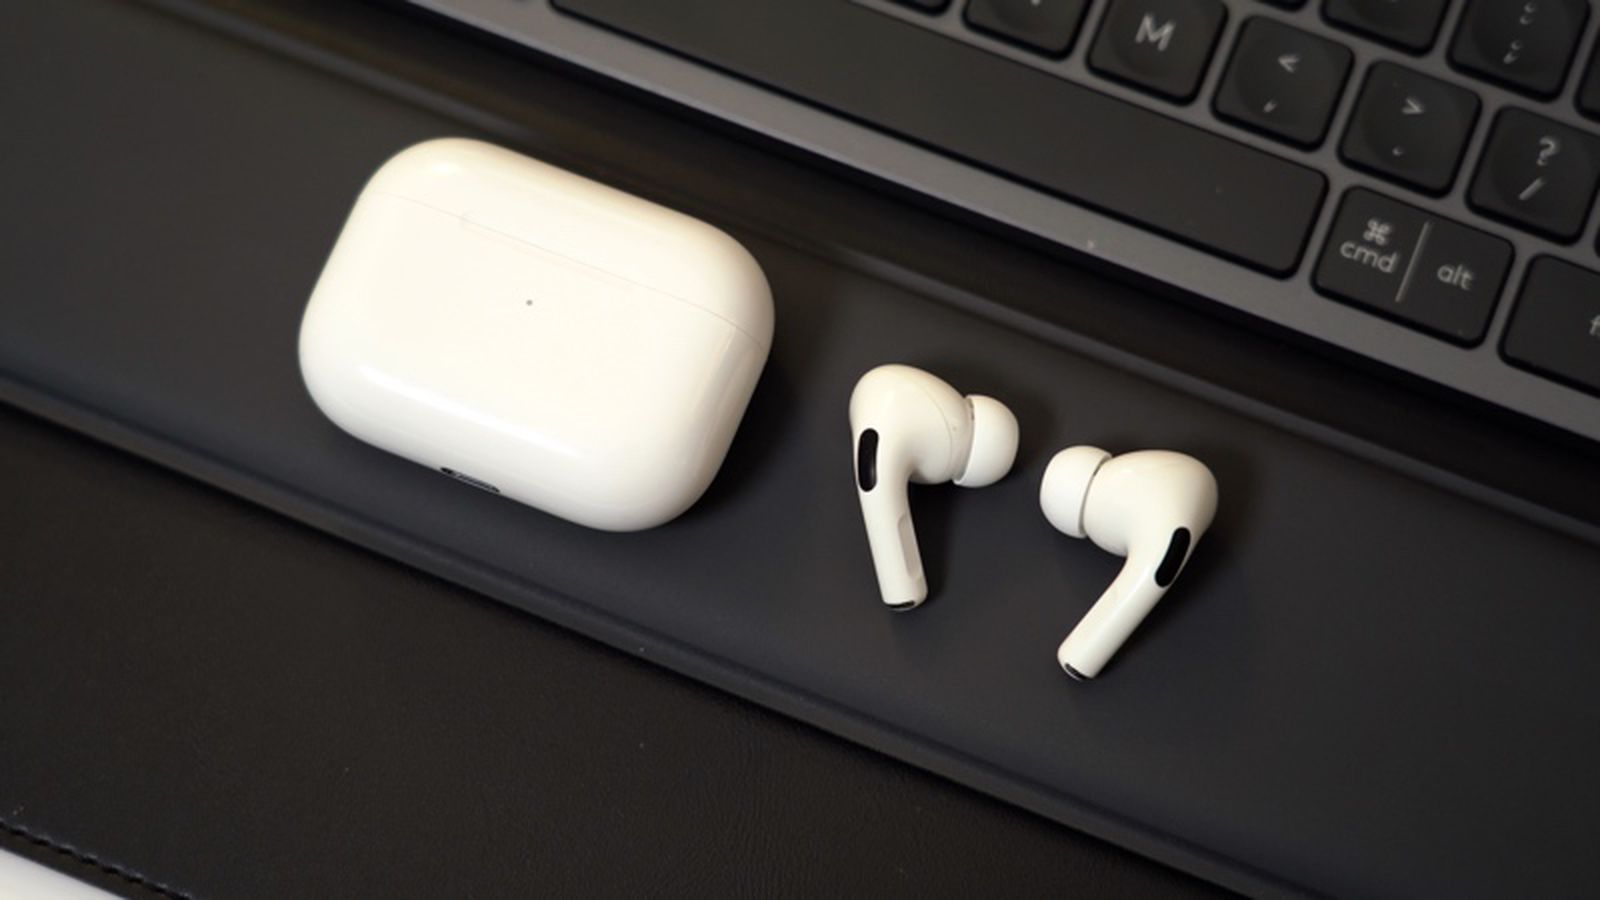 It is rumored that the new AirPods Pro and iPhone SE will be launched in April 2021